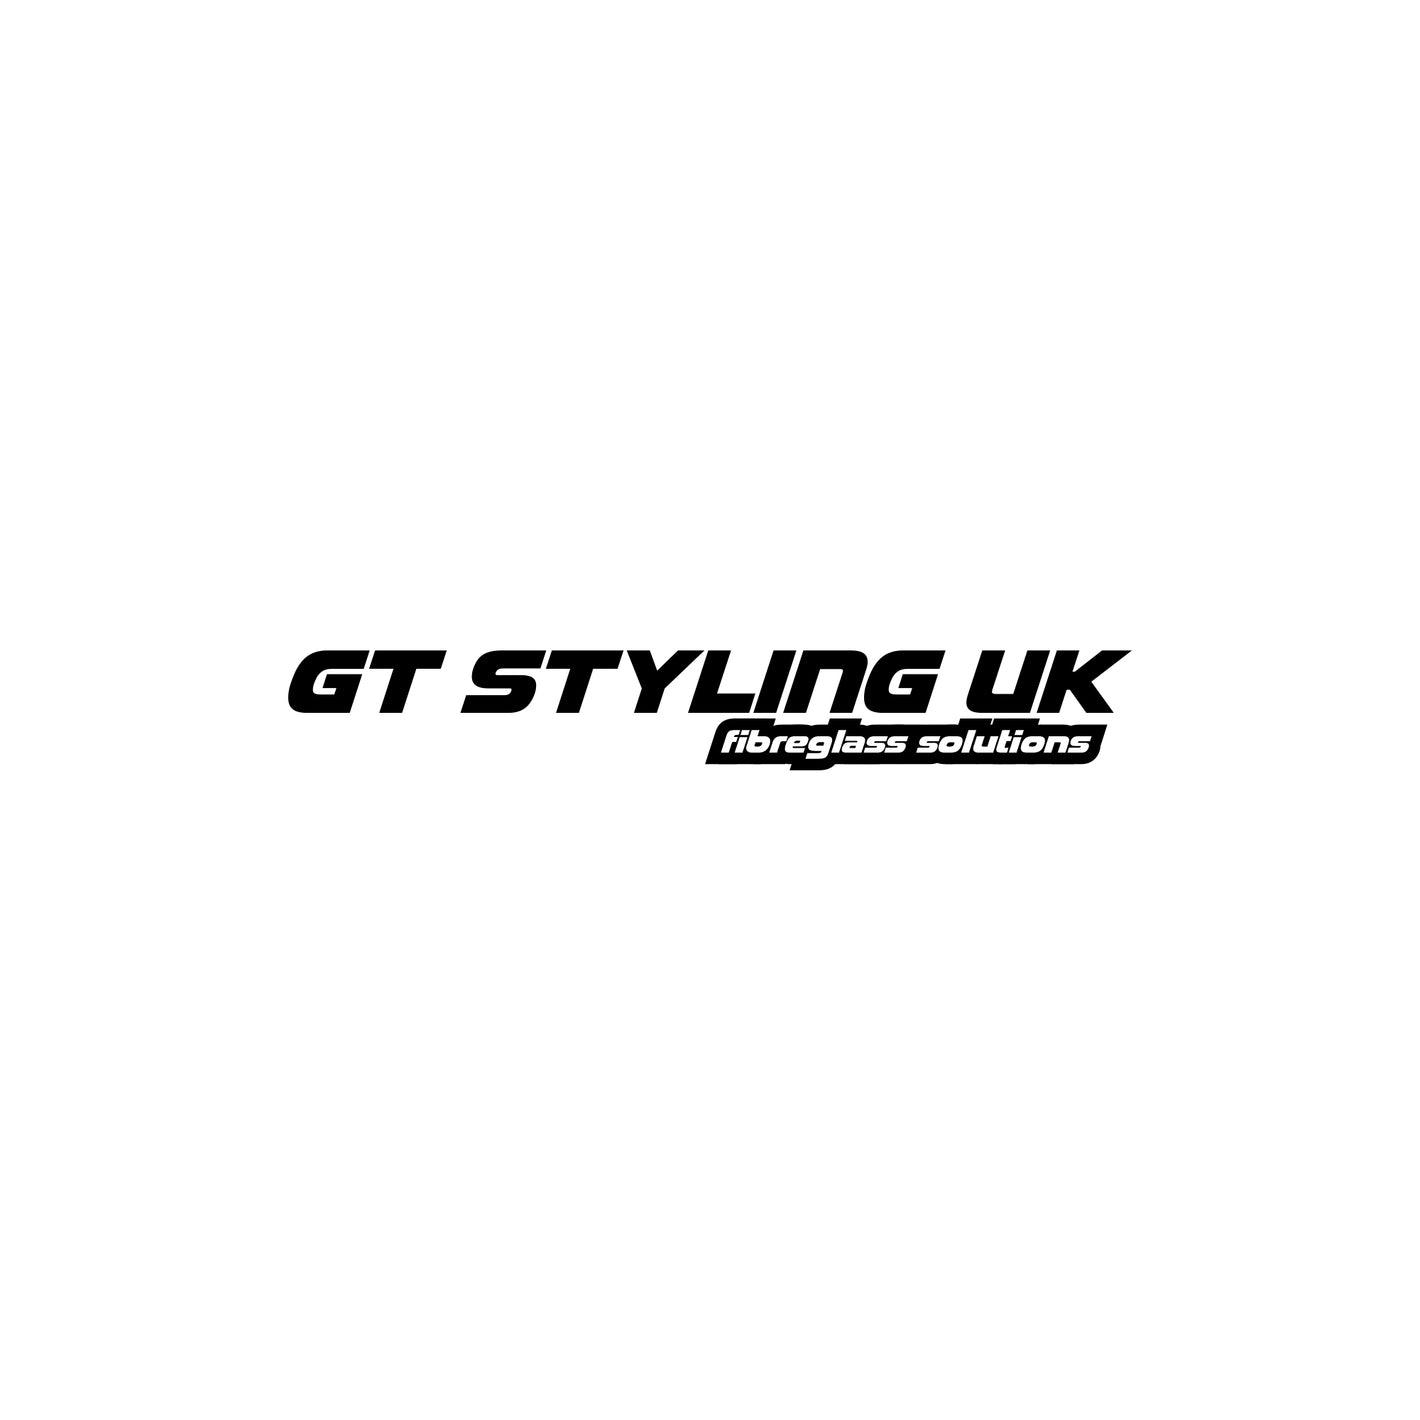 All GT Styling Products